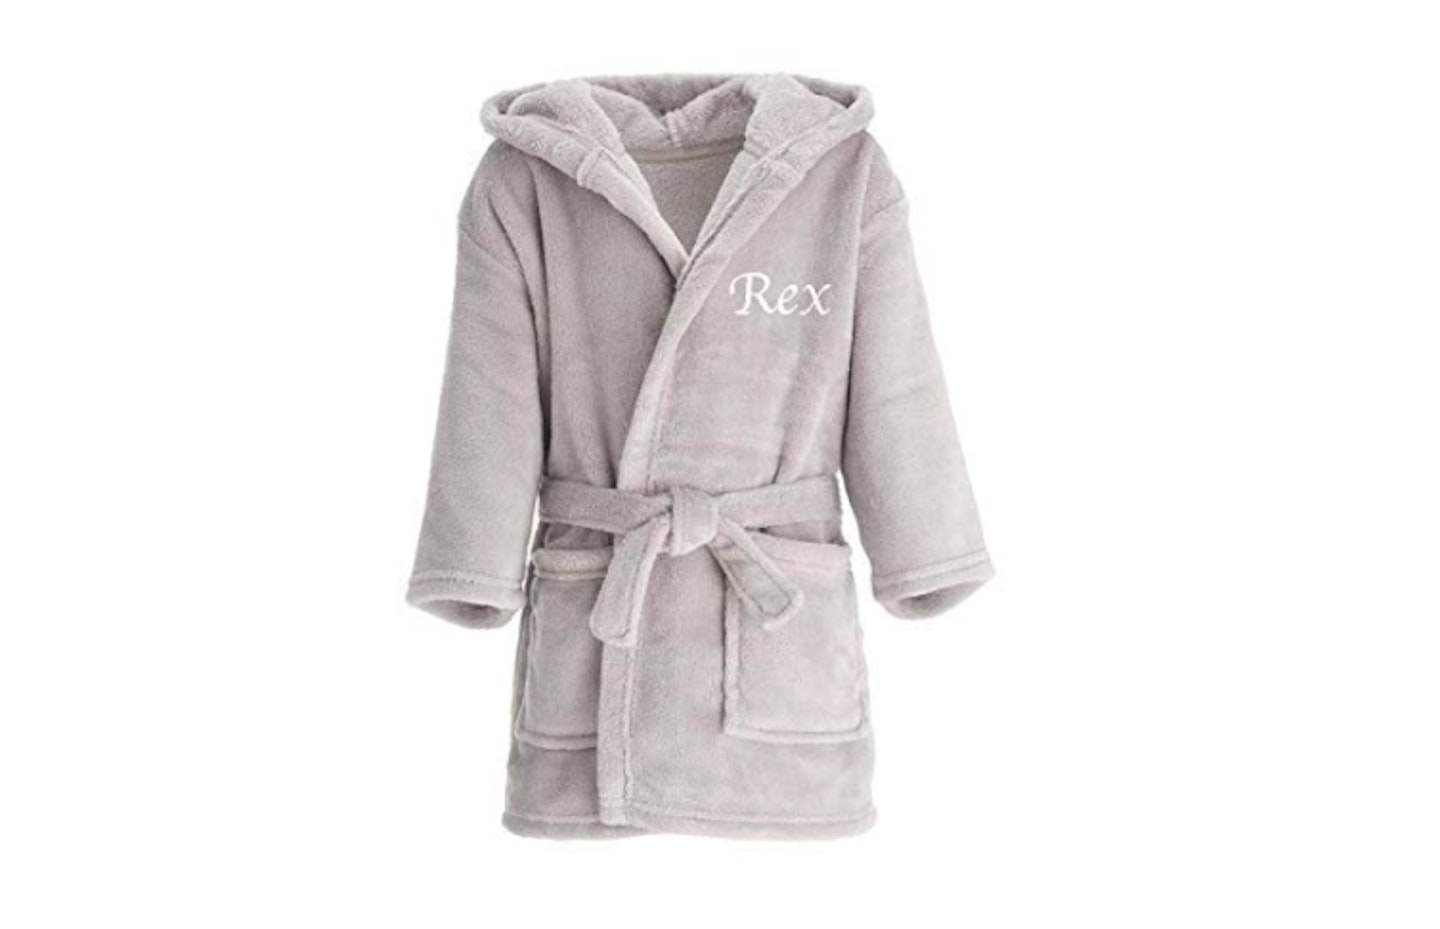 Stacey Solomon x Amazon Handmade: Personalised Name Children's Dressing Gown Grey